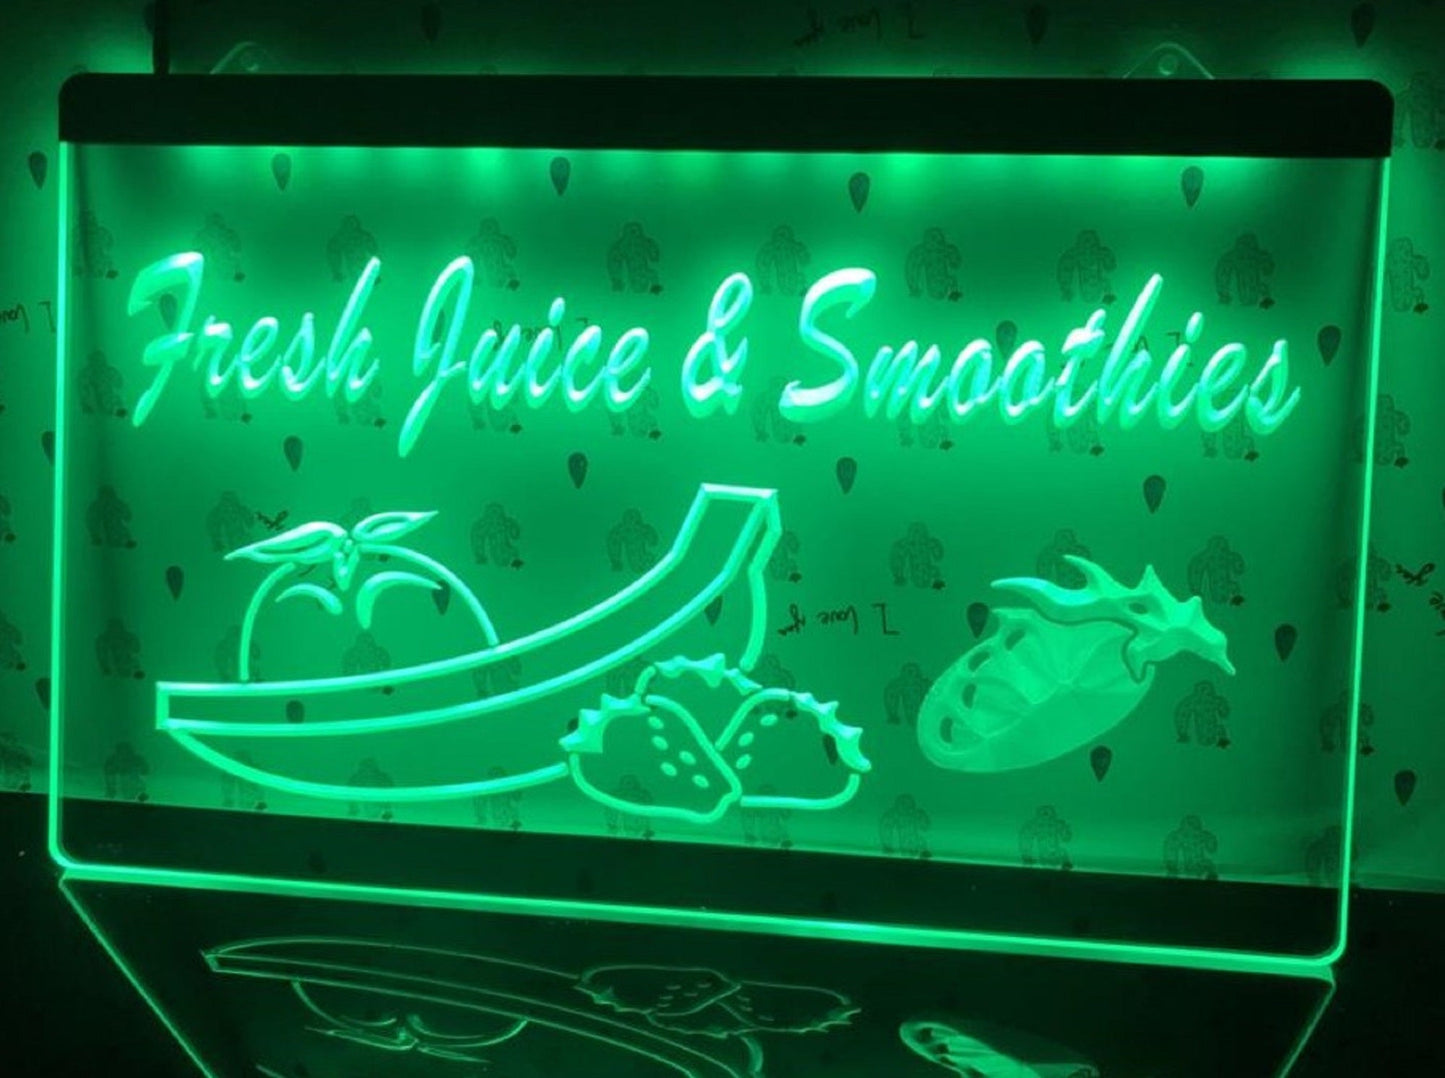 Neon Sign Fresh Juice & Smoothies For Drinks Coffee Shop Decor